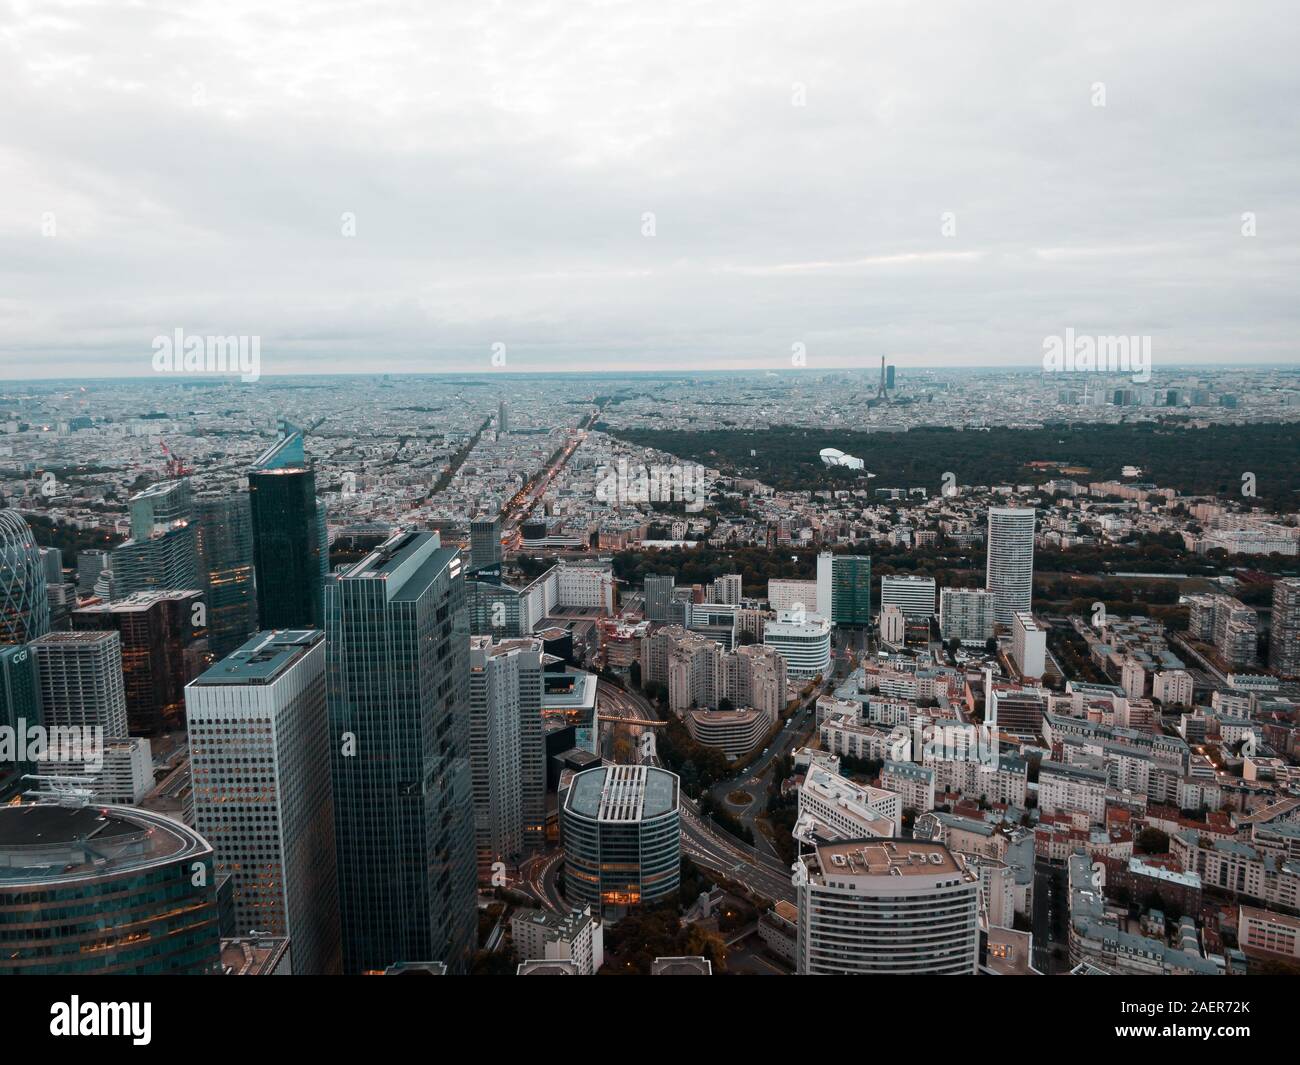 Aerial view of the La Defense Business District in Paris, France Stock Photo